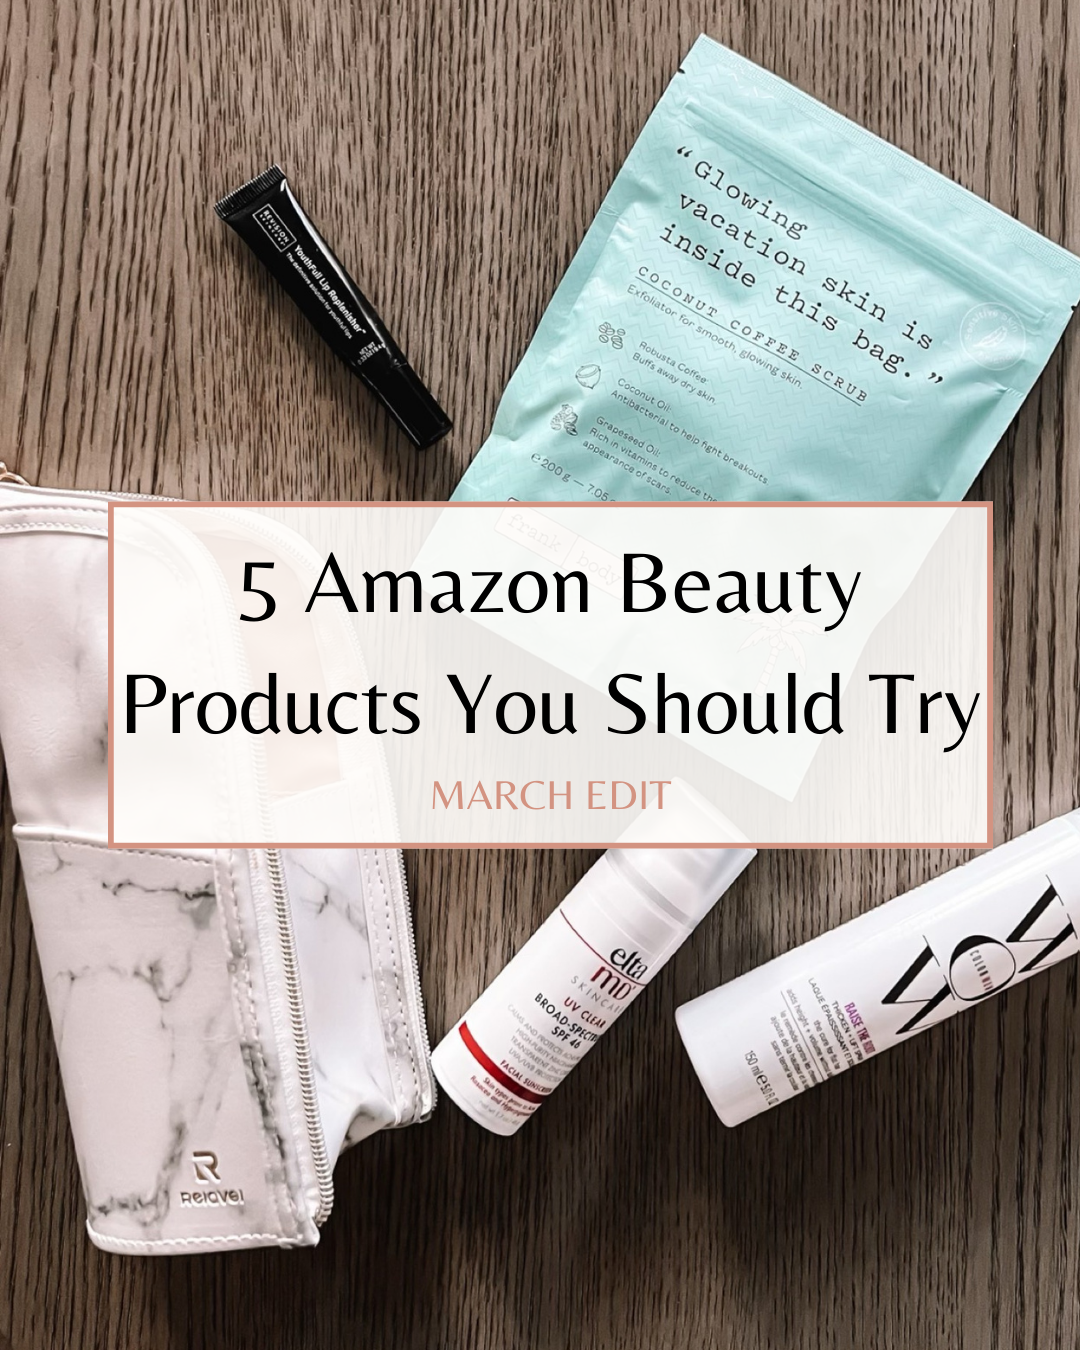 5 Amazon Beauty Products You Should Try – March Edit